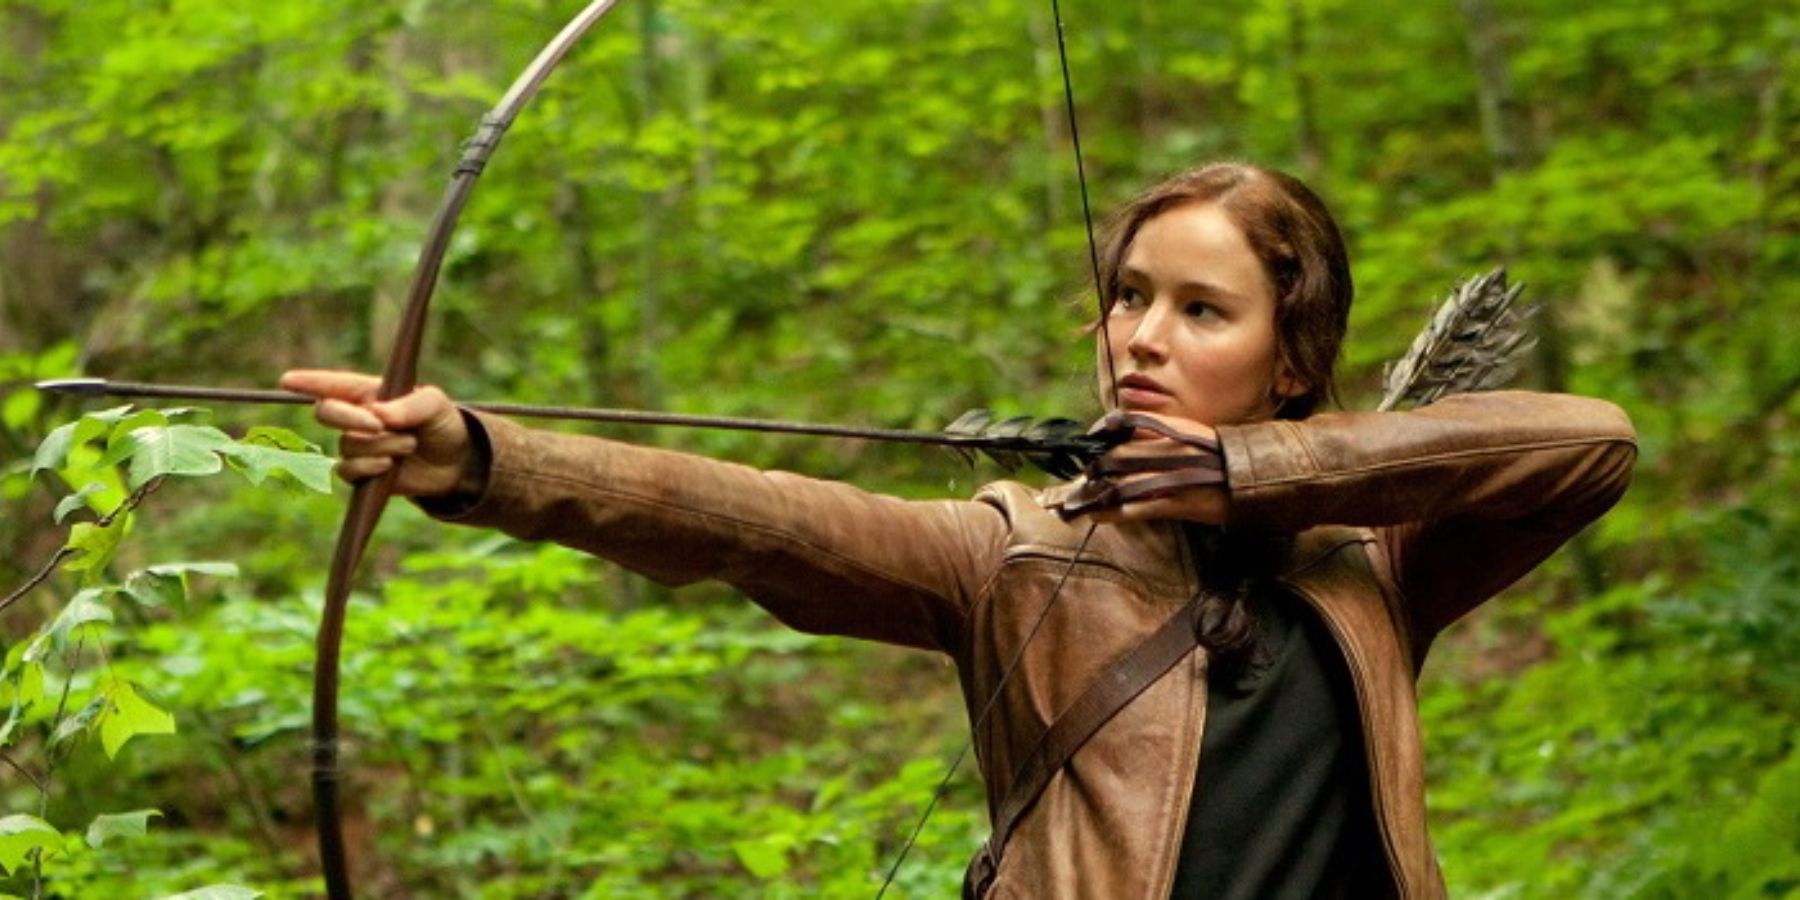 Jennifer Lawrence as Katniss Everdeen holding a bow in The Hunger Games